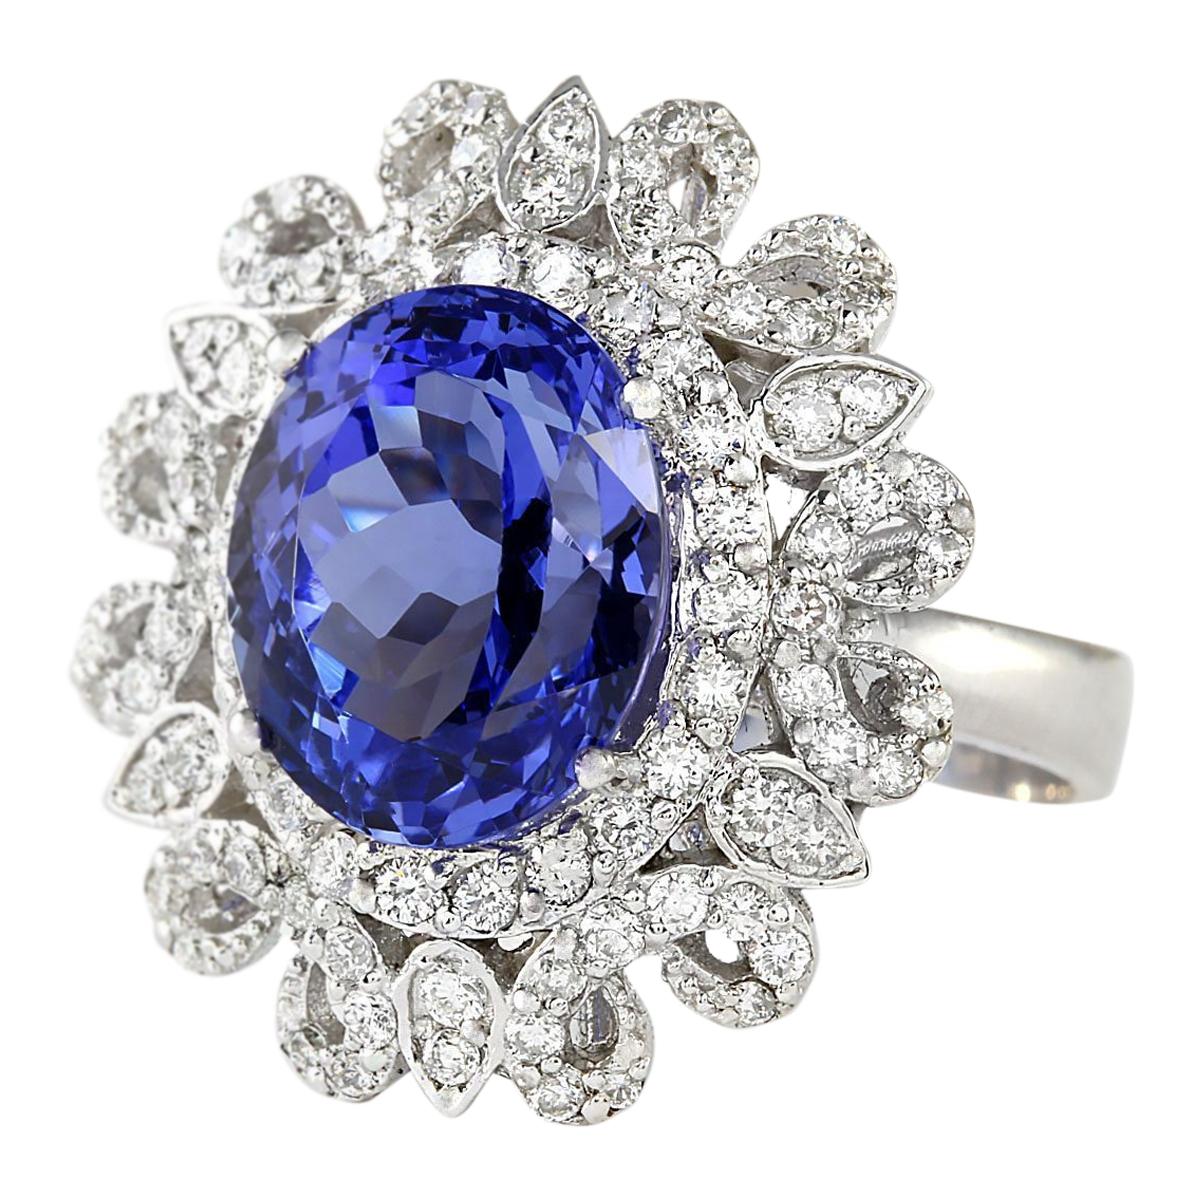 Introducing our stunning 6.97 Carat Tanzanite 14 Karat White Gold Diamond Ring. Crafted from stamped 14K White Gold, this ring boasts a total weight of 8.5 grams, ensuring both quality and durability. At its center shines a mesmerizing Tanzanite